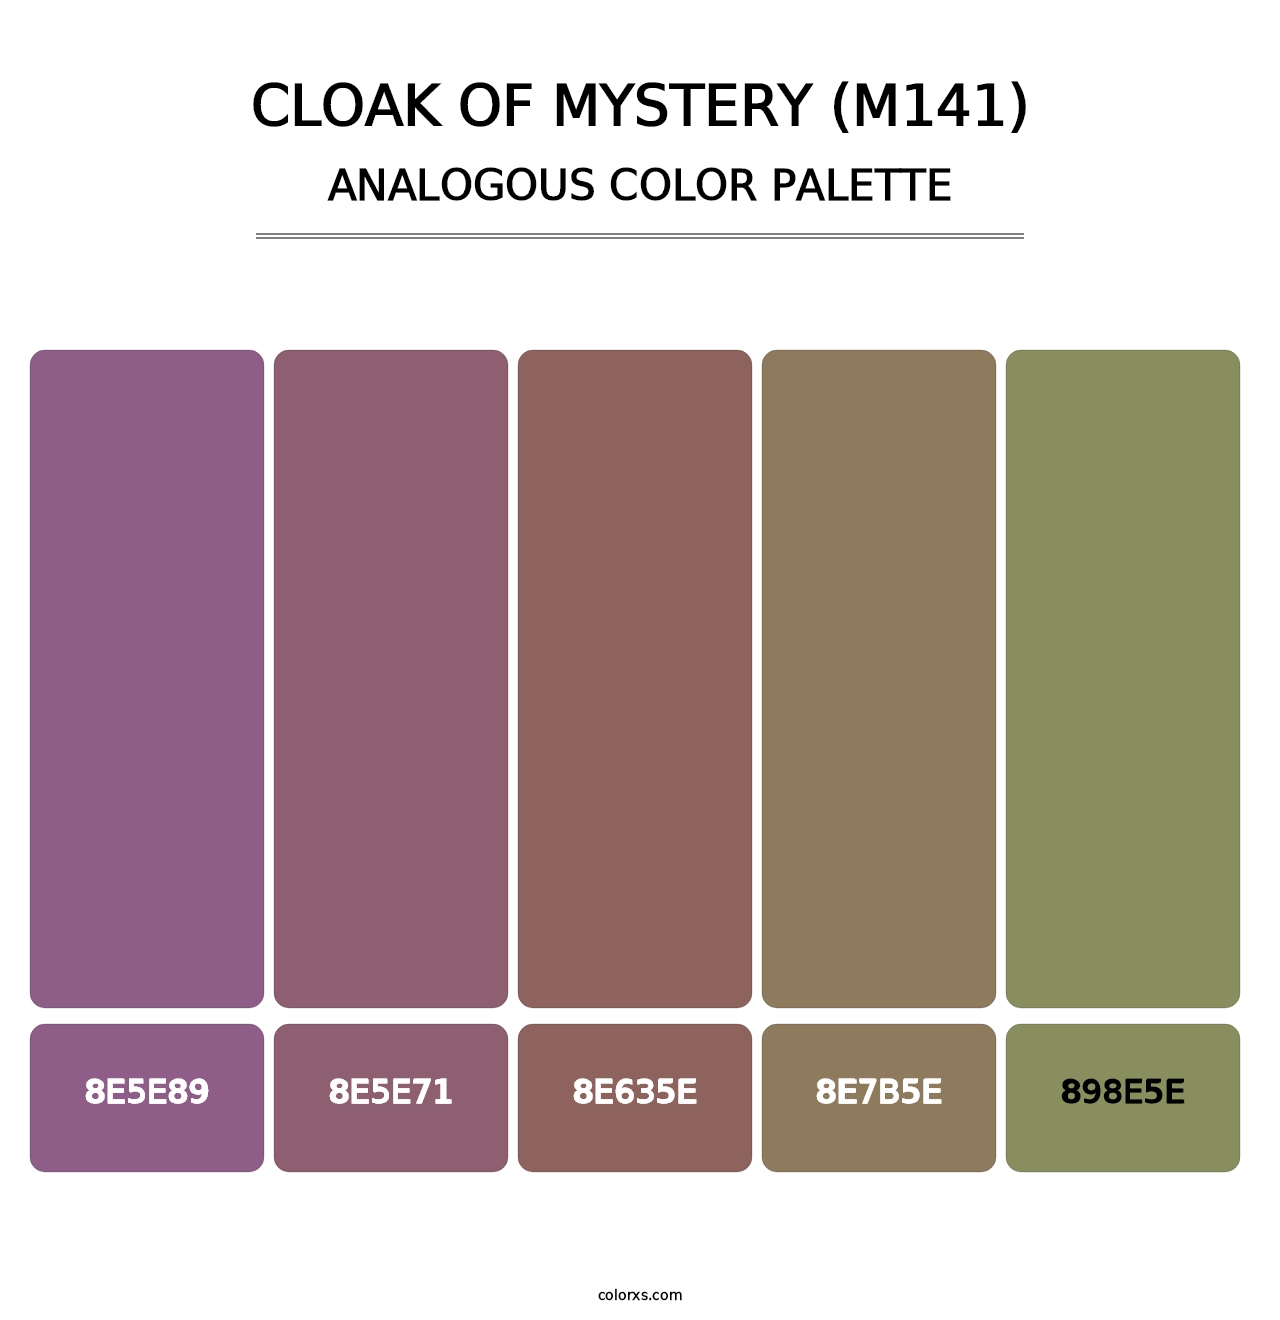 Cloak of Mystery (M141) - Analogous Color Palette